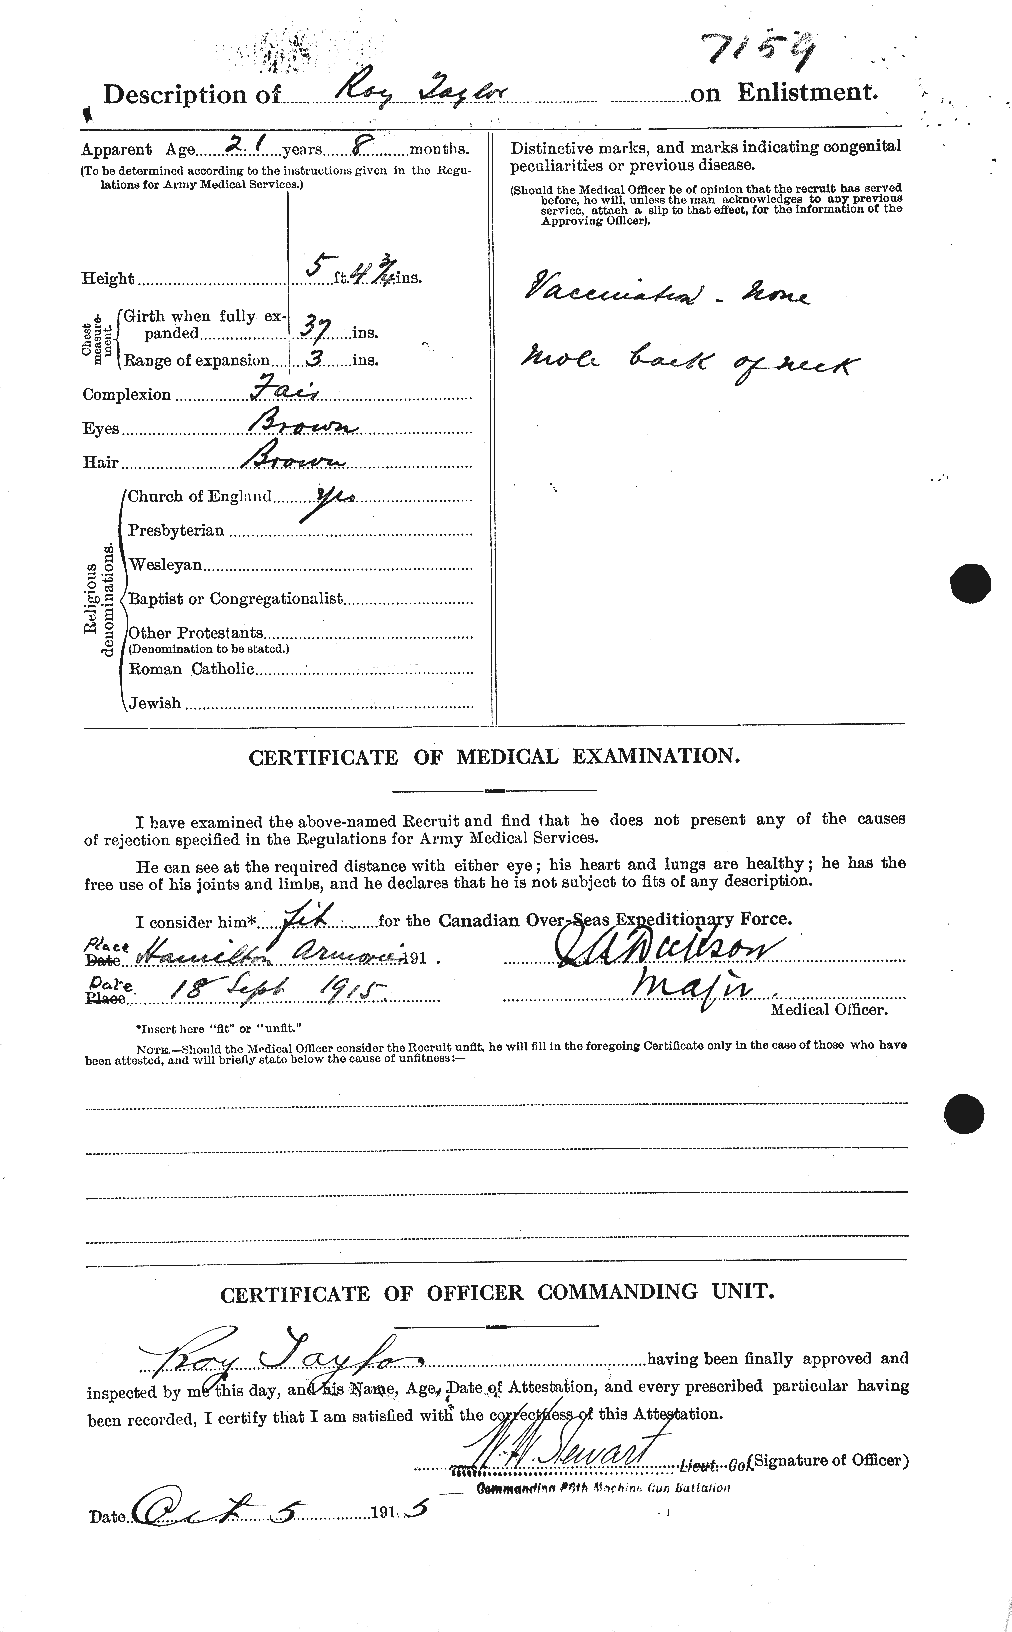 Personnel Records of the First World War - CEF 627519b